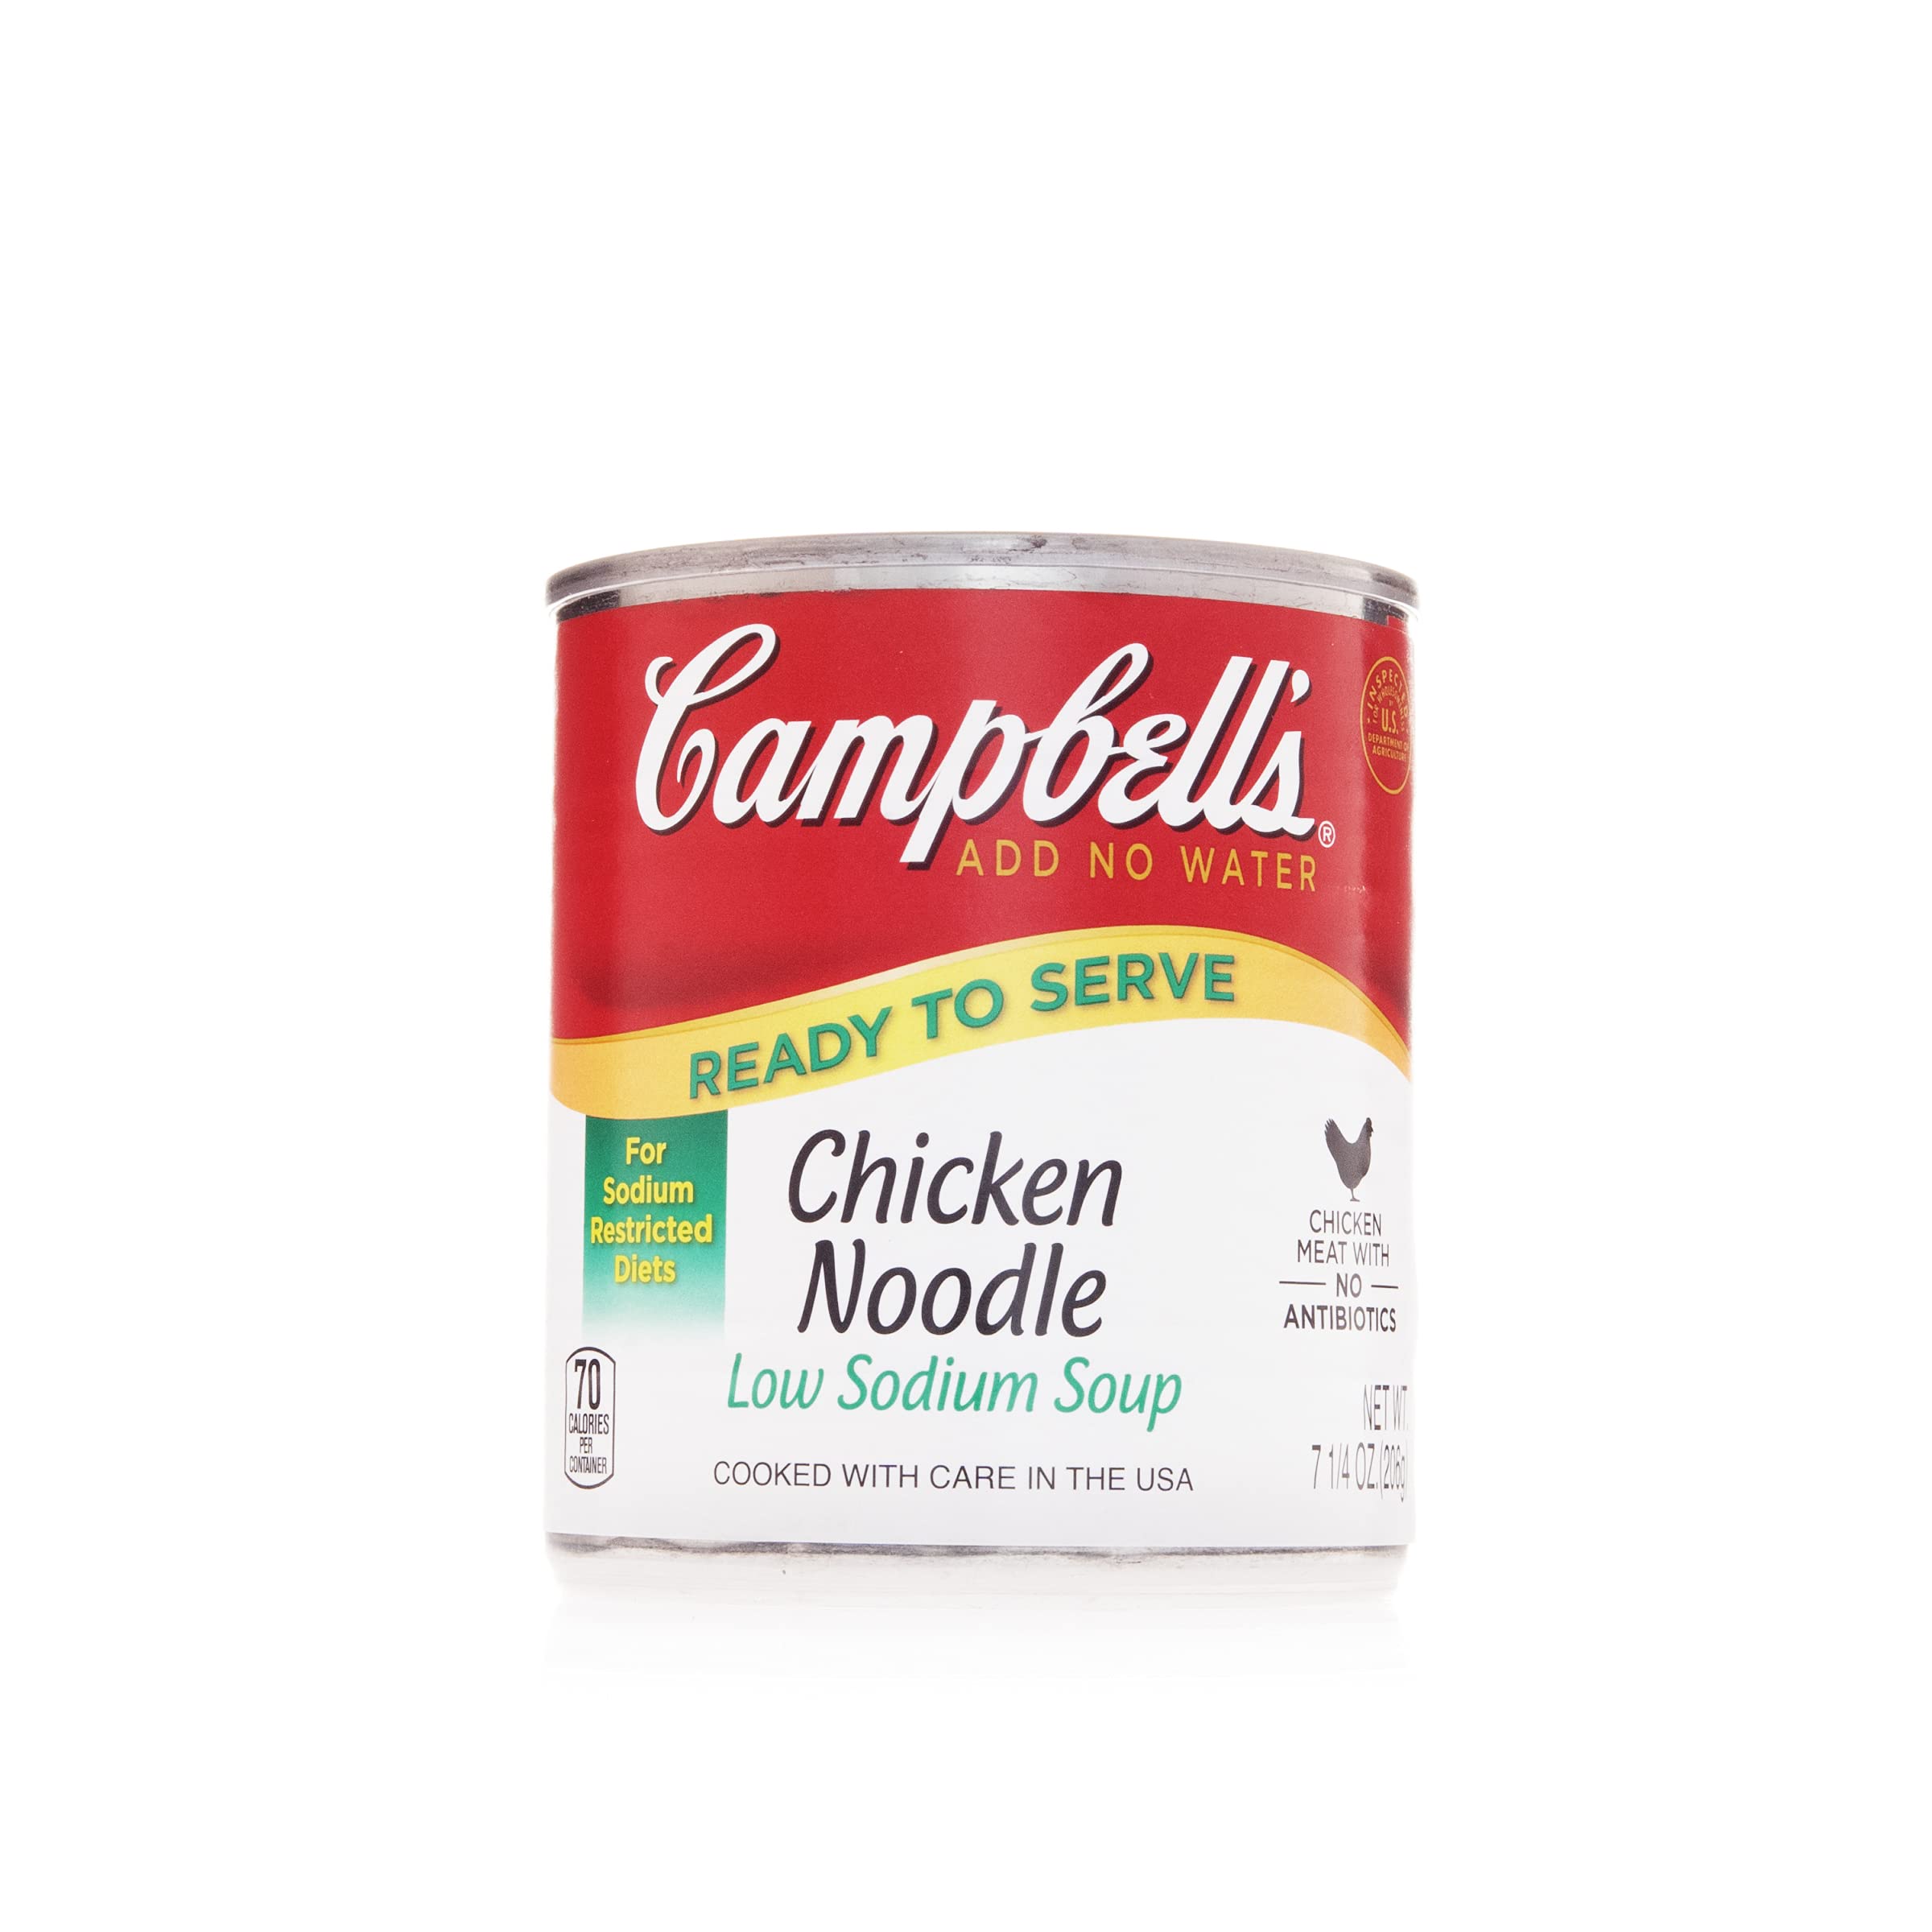 Campbell’s Classic Low Sodium Ready to Serve Chicken Noodle Soup, 7.25 Ounce Cans, 24-Pack